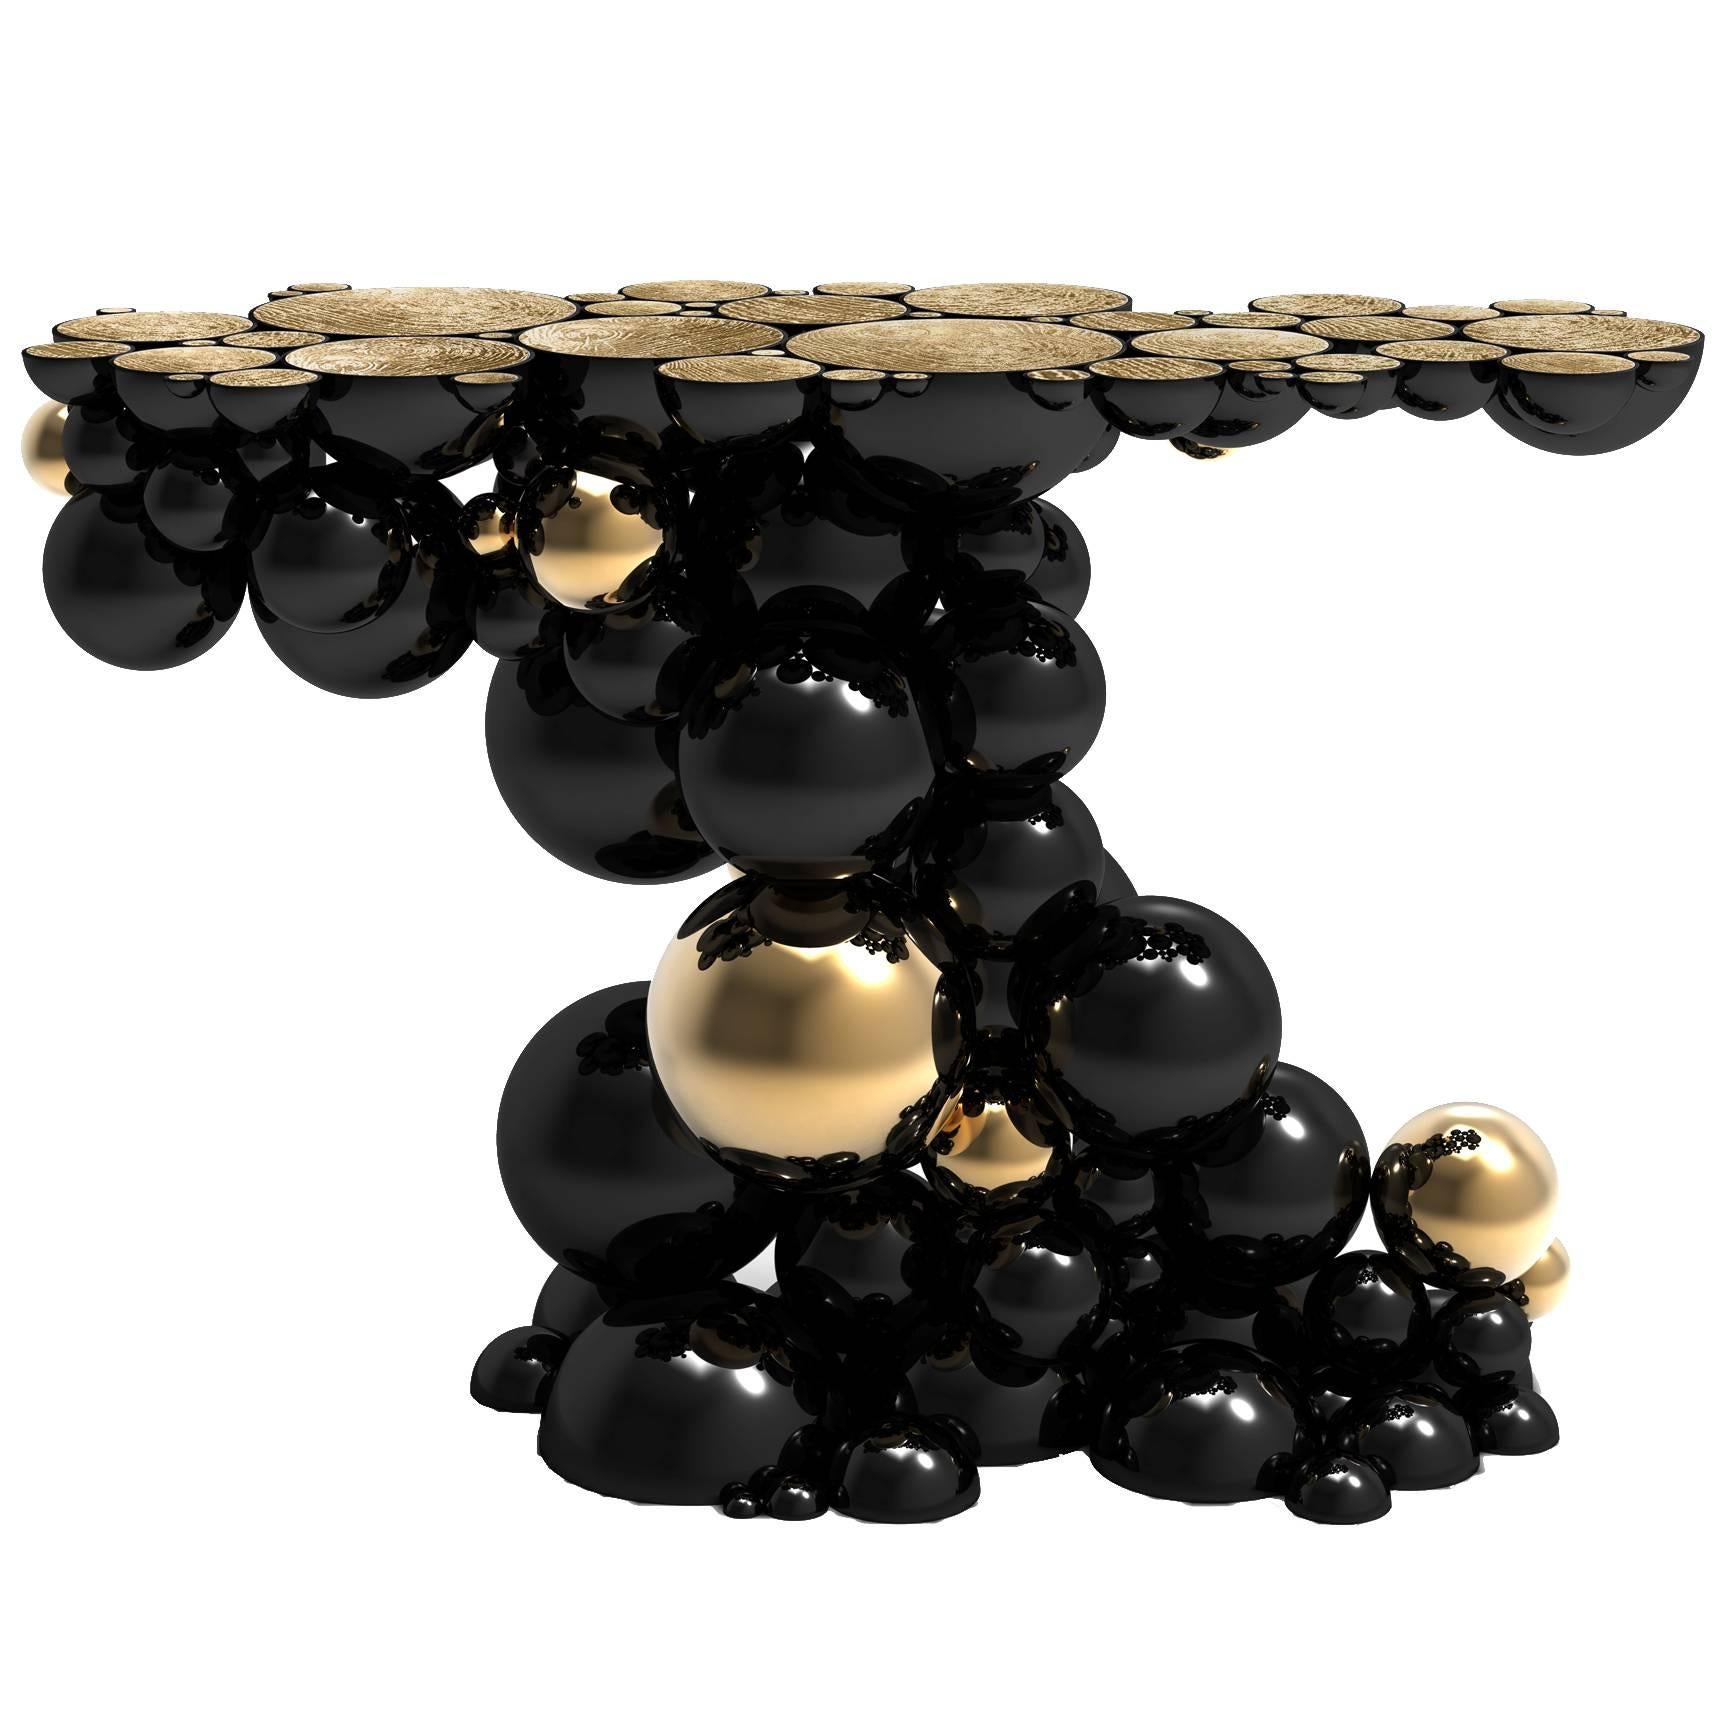 Spheres Console Table with Aluminium Black and Gold Spheres